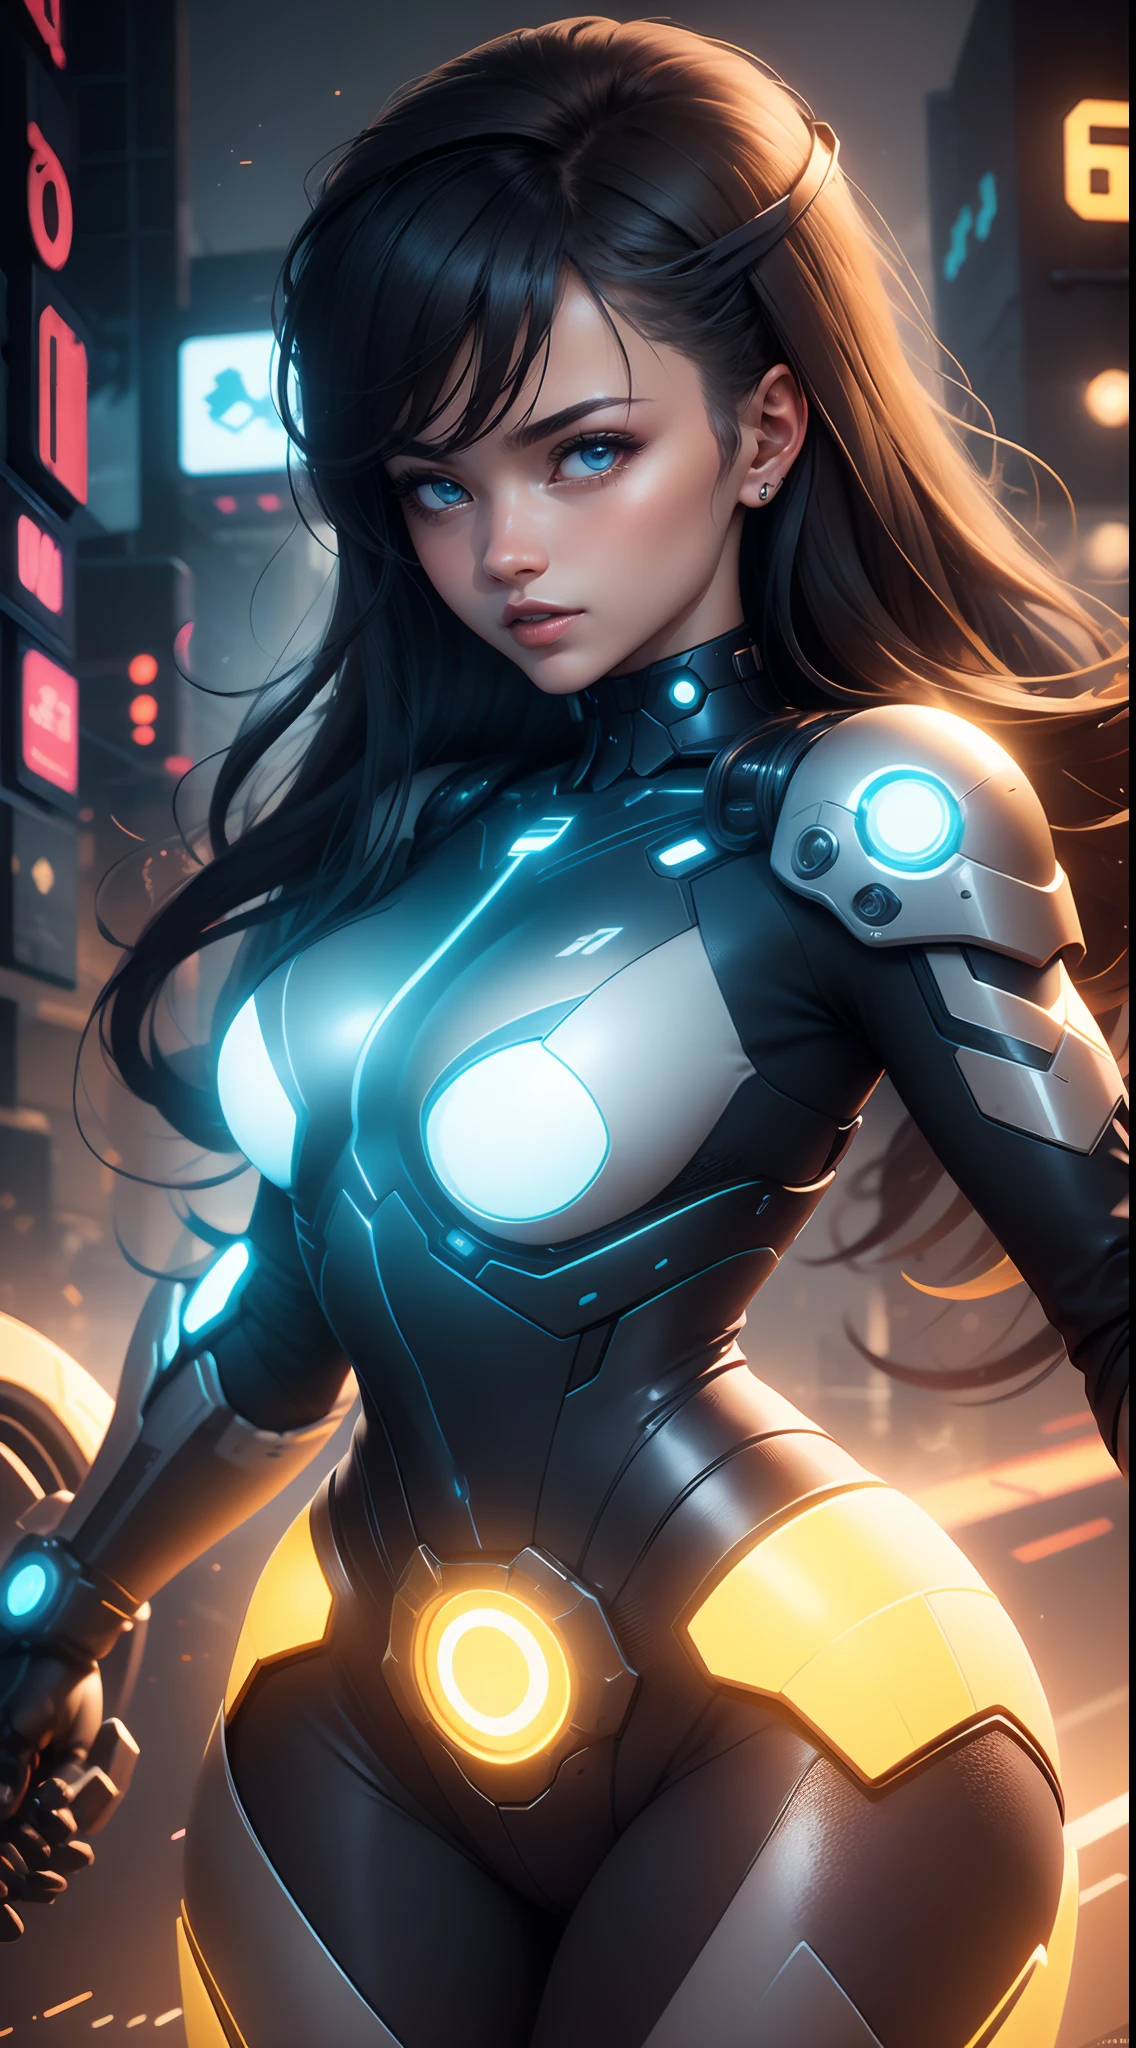 In a futuristic city, a girl a human arm and her second mecha arm and both mecha legs stand. The chrome metal glistening in the neon lights. His eyes are sharp and detailed, depicting a sense of determination. His face is adorned with intricate circuit patterns, adding to his robotic charm. Slightly separated, her lips hold an enigmatic smile. The exterior of the girl exudes strength and power, with elegant curves and perfectly designed body proportions.

Her outfit is a fusion of technology and fashion, with a tight body that accentuates her agile movements. The suit is adorned with glowing LED strips, highlighting its robotic nature. She stands in a dynamic posture, a hand extended forward, as if to trigger a powerful explosion of her high-tech forearm guns.

The scene takes place against a backdrop of futuristic skyscrapers, dominating the cityscape. The buildings are bathed in vibrant shades of blue and purple, creating a supernatural atmosphere. The streets below are animated by flying cars and bustling crowds, indicating the cutting-edge technology and bustling city life.

The lighting of the scene is dramatic, projecting long shadows and accentuating the features of the girl. Neon signs on billboards and road signs create a colourful and dynamic atmosphere. The glow of the city reflects the polished surface of the mecha girl, highlighting the high level of detail and realism.

This invite aims to generate a high quality, detailed and photorealistic image of a mecha girl in a futuristic city. The focus is on capturing the elegance of the mecha girl’s design, the vibrant atmosphere of the city and the play of light and shadows. The resulting image should be a masterpiece of digital art, with ultra-fine details and bright colors, giving life to this futuristic world.